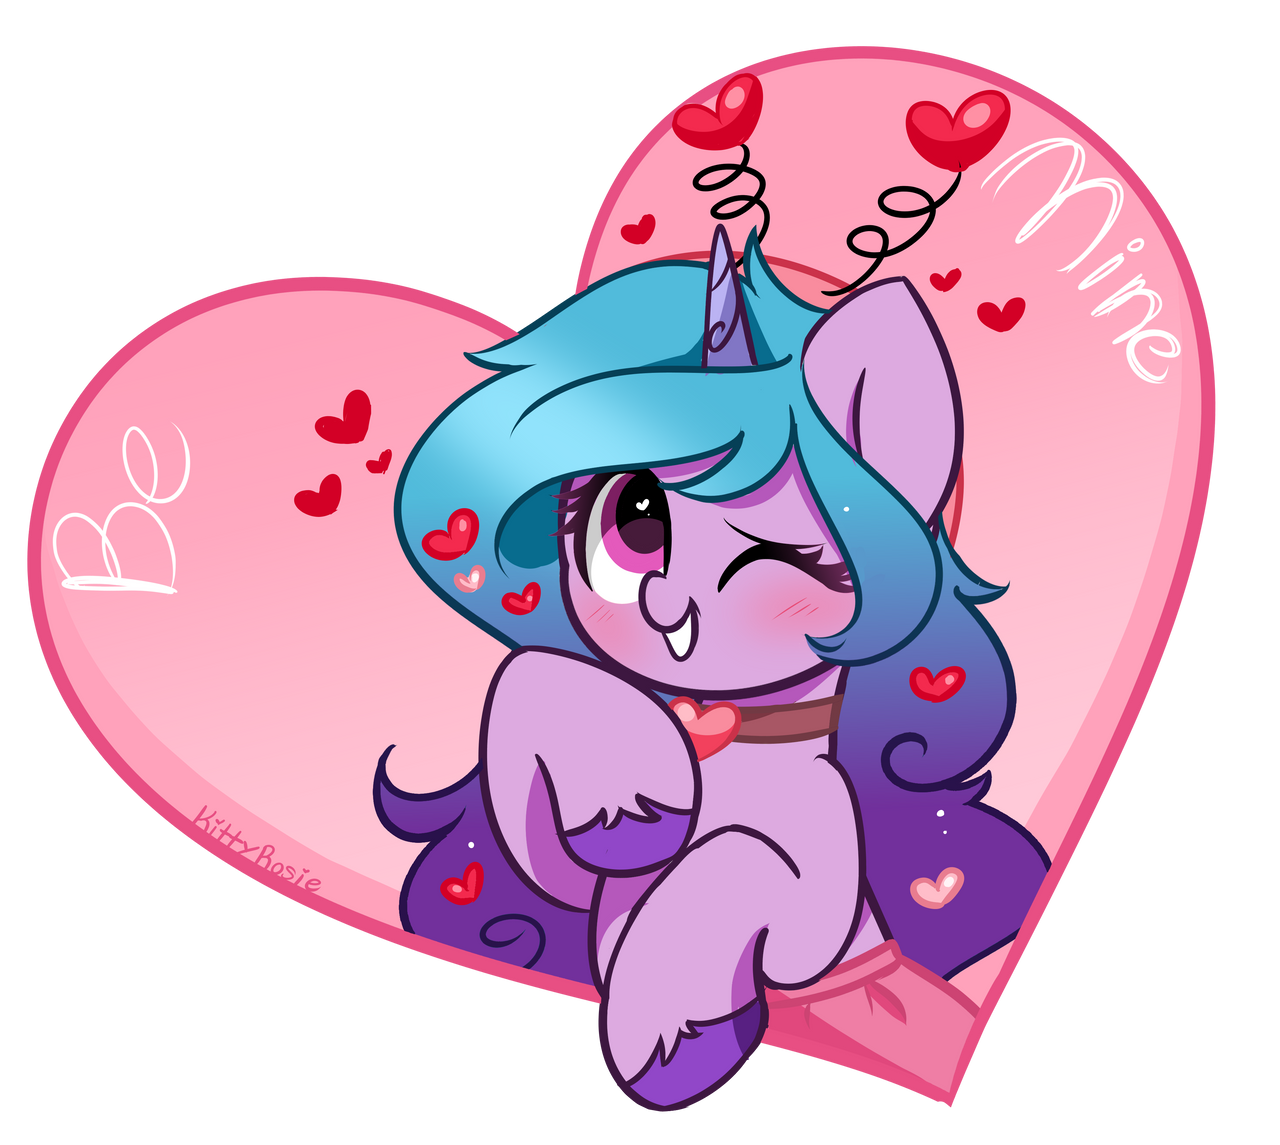 be_mine_by_itskittyrosie_dfo8lle-fullview.png